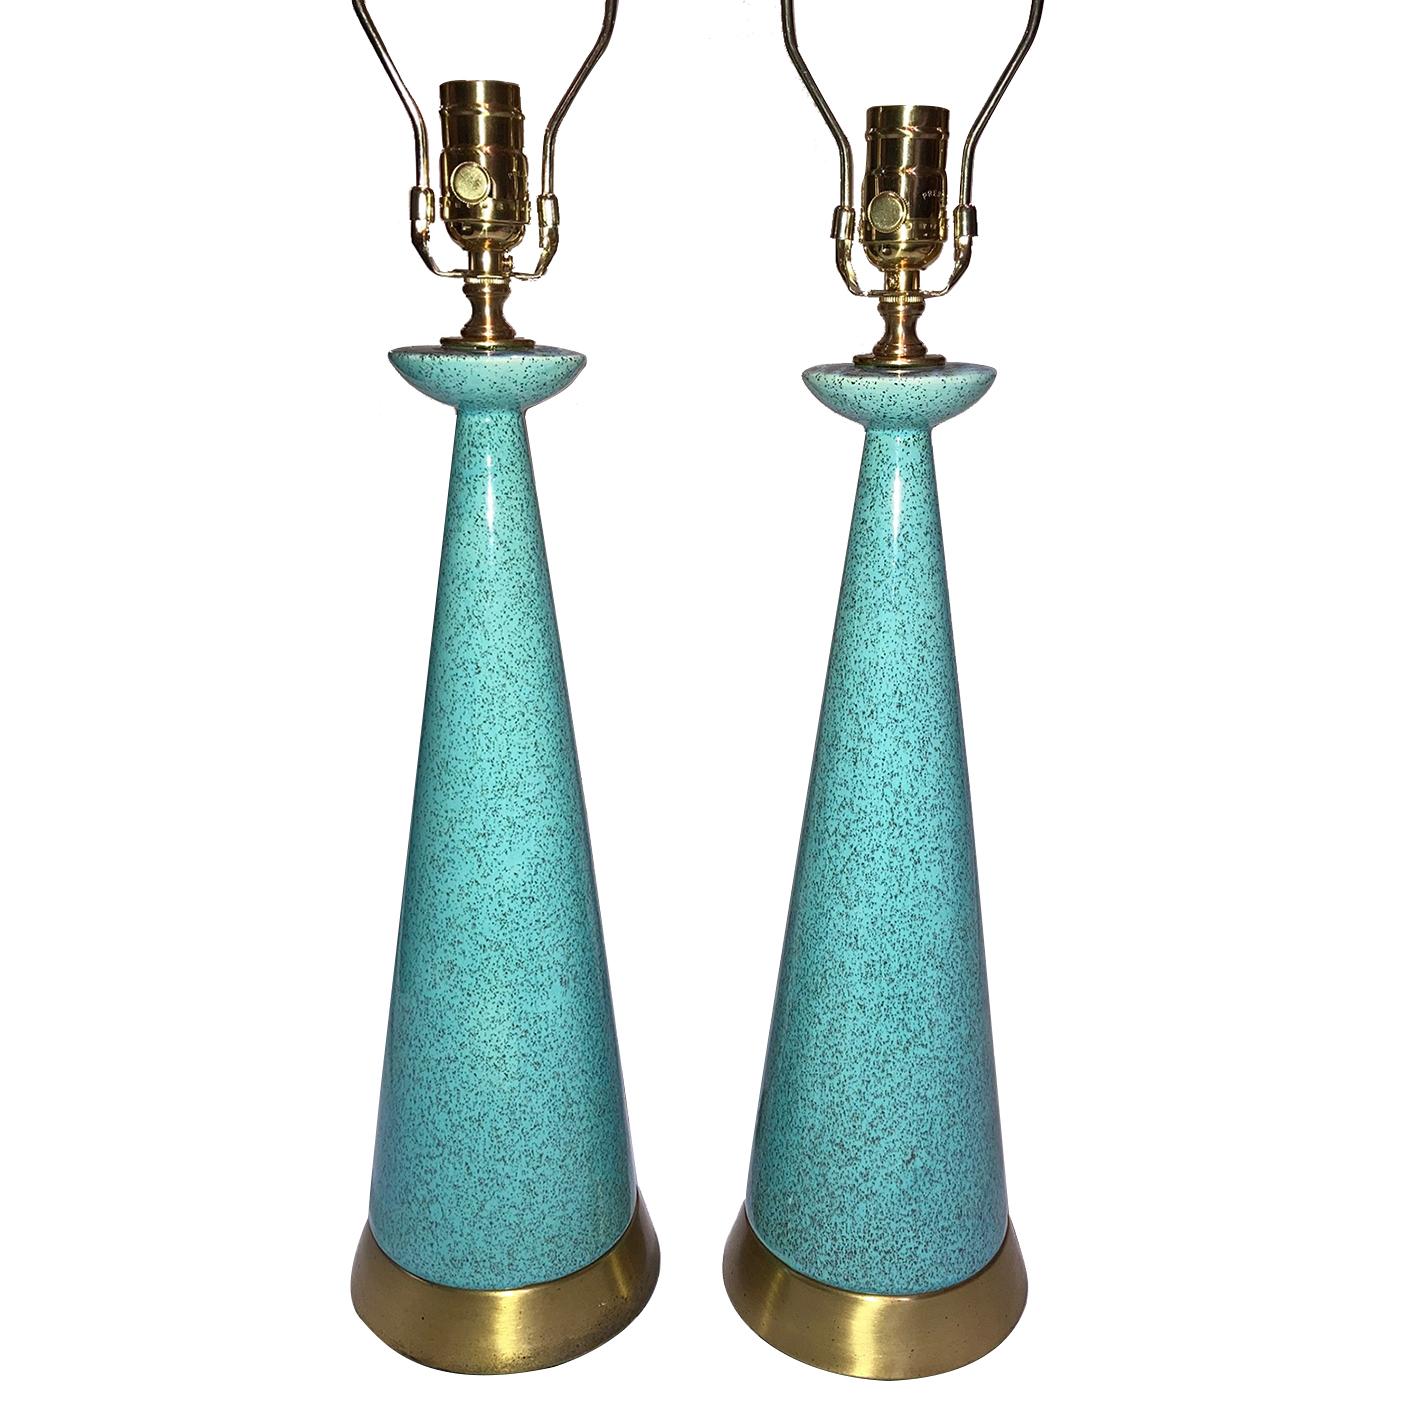 A pair of circa 1960's Italian glazed blue ceramic table lamps with gilt brass bases.

Measurements:
Height of body: 19